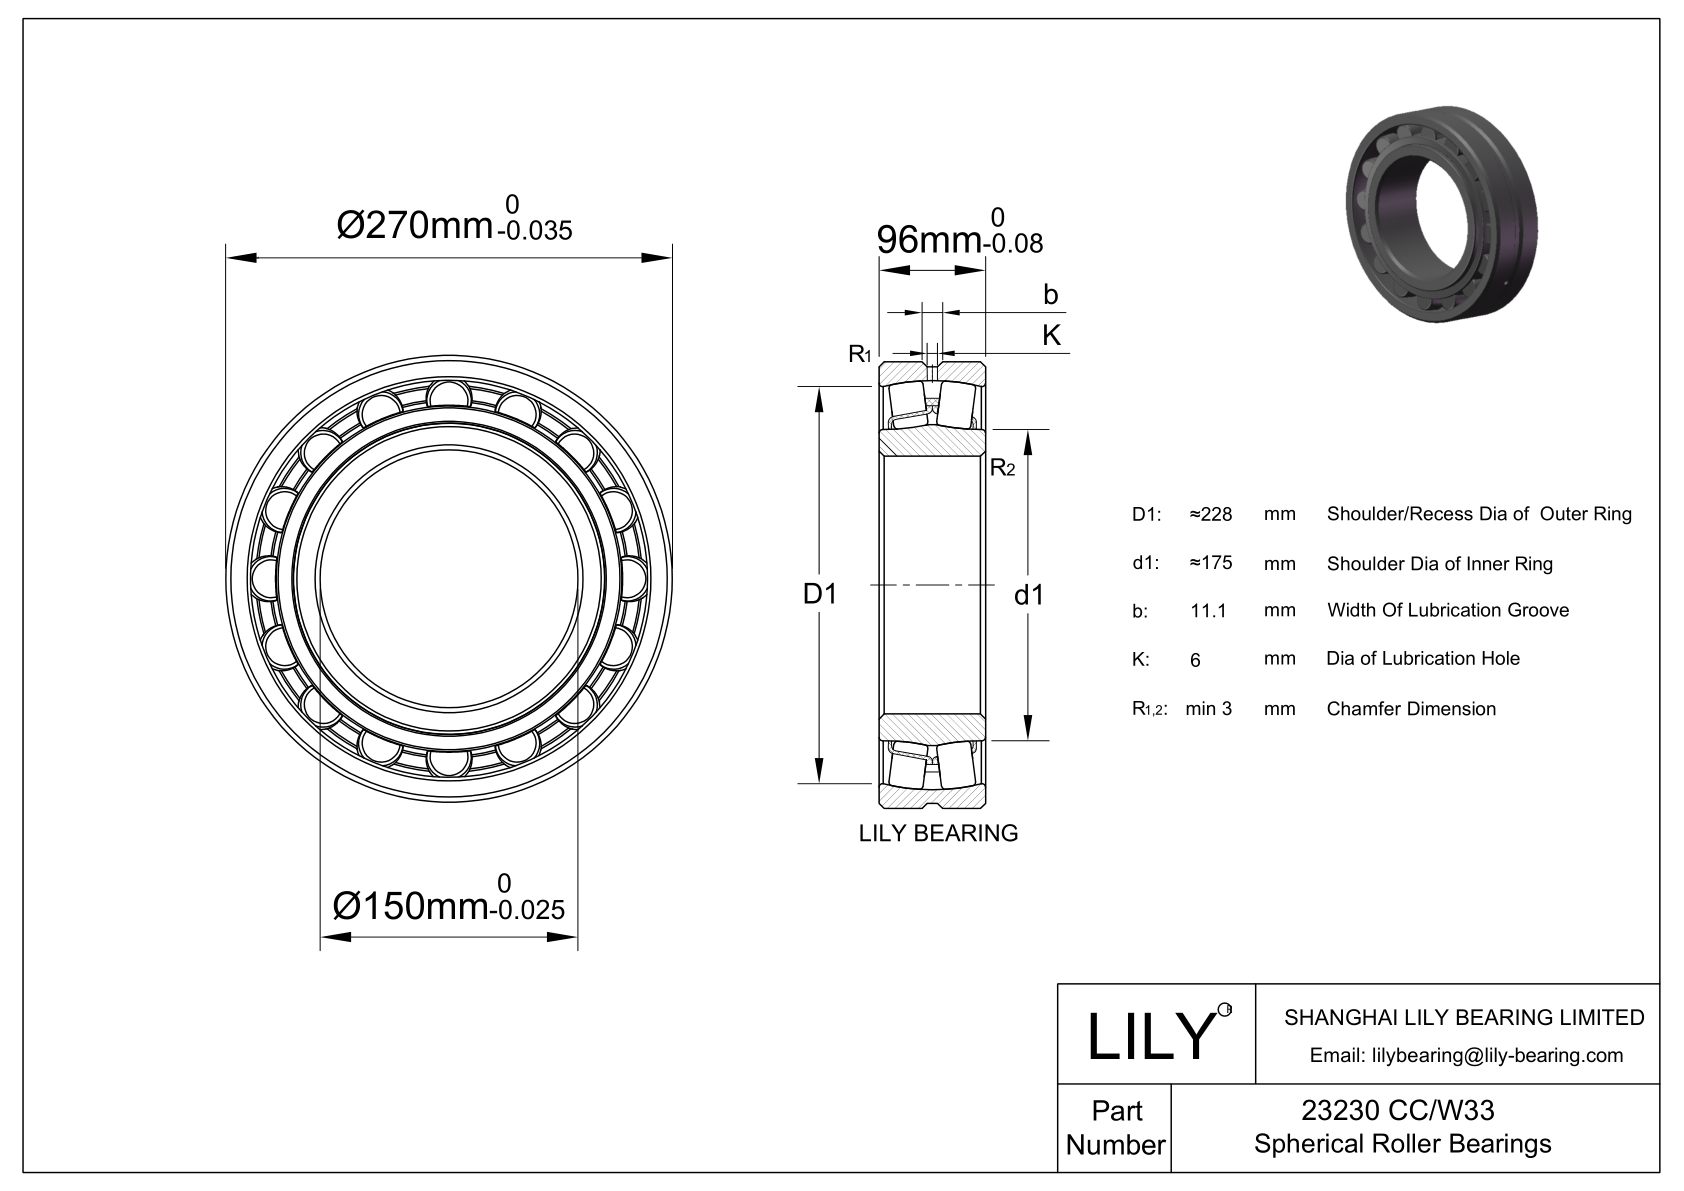 23230 CC/W33 Double Row Spherical Roller Bearing cad drawing